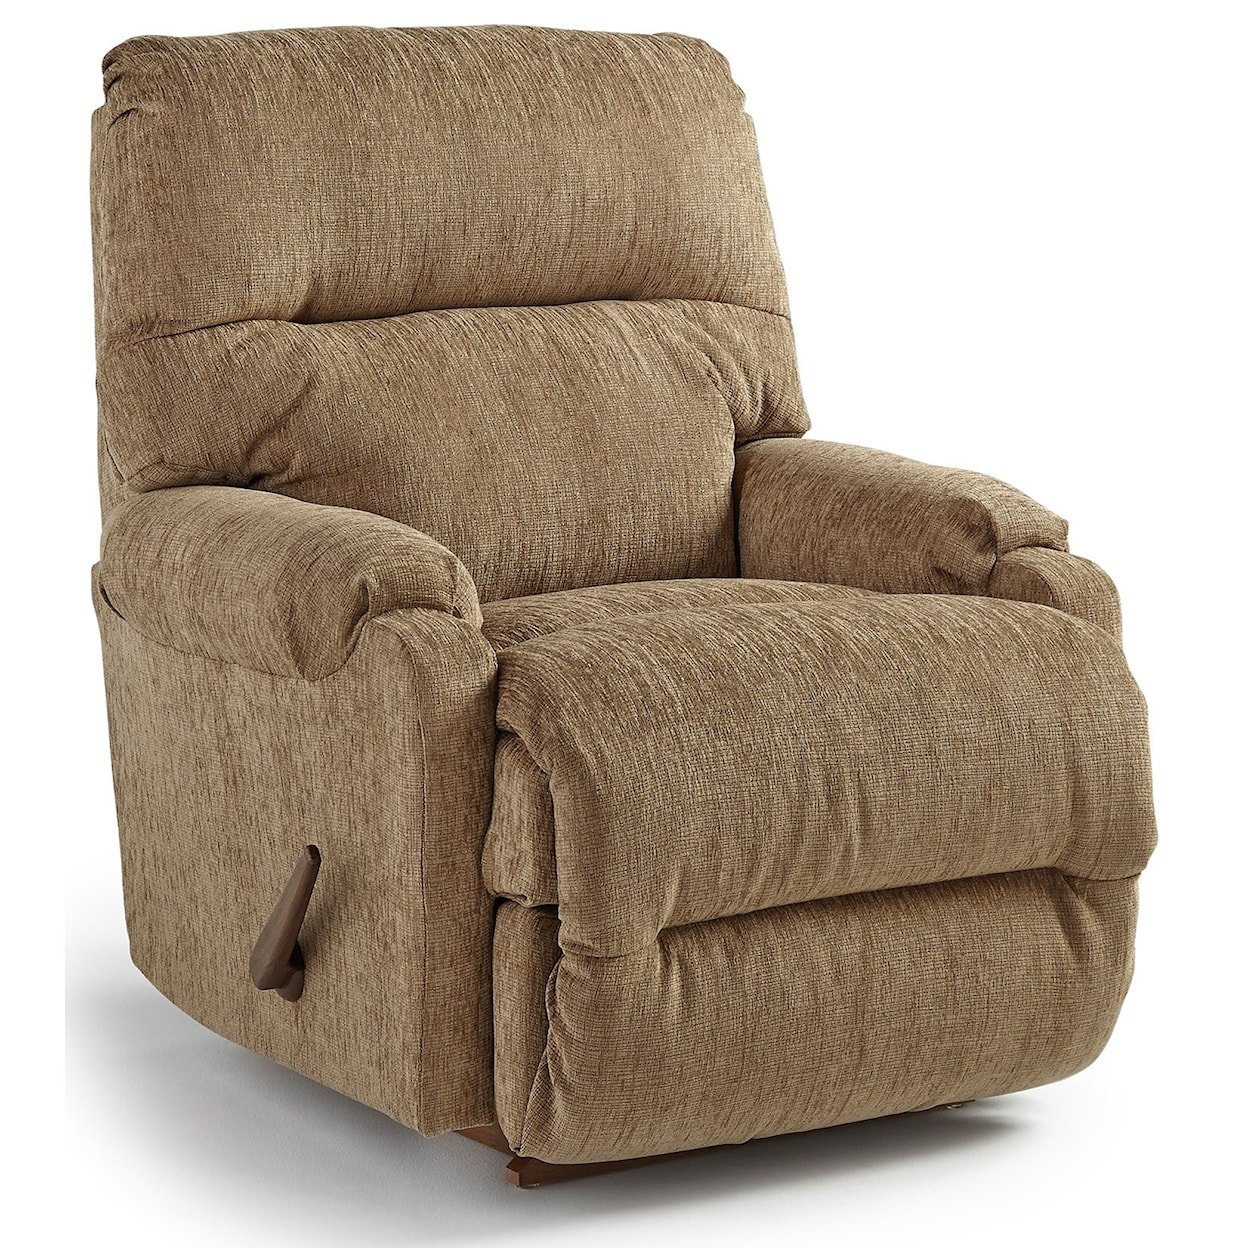 Best Home Furnishings Cannes Swivel Glider Recliner